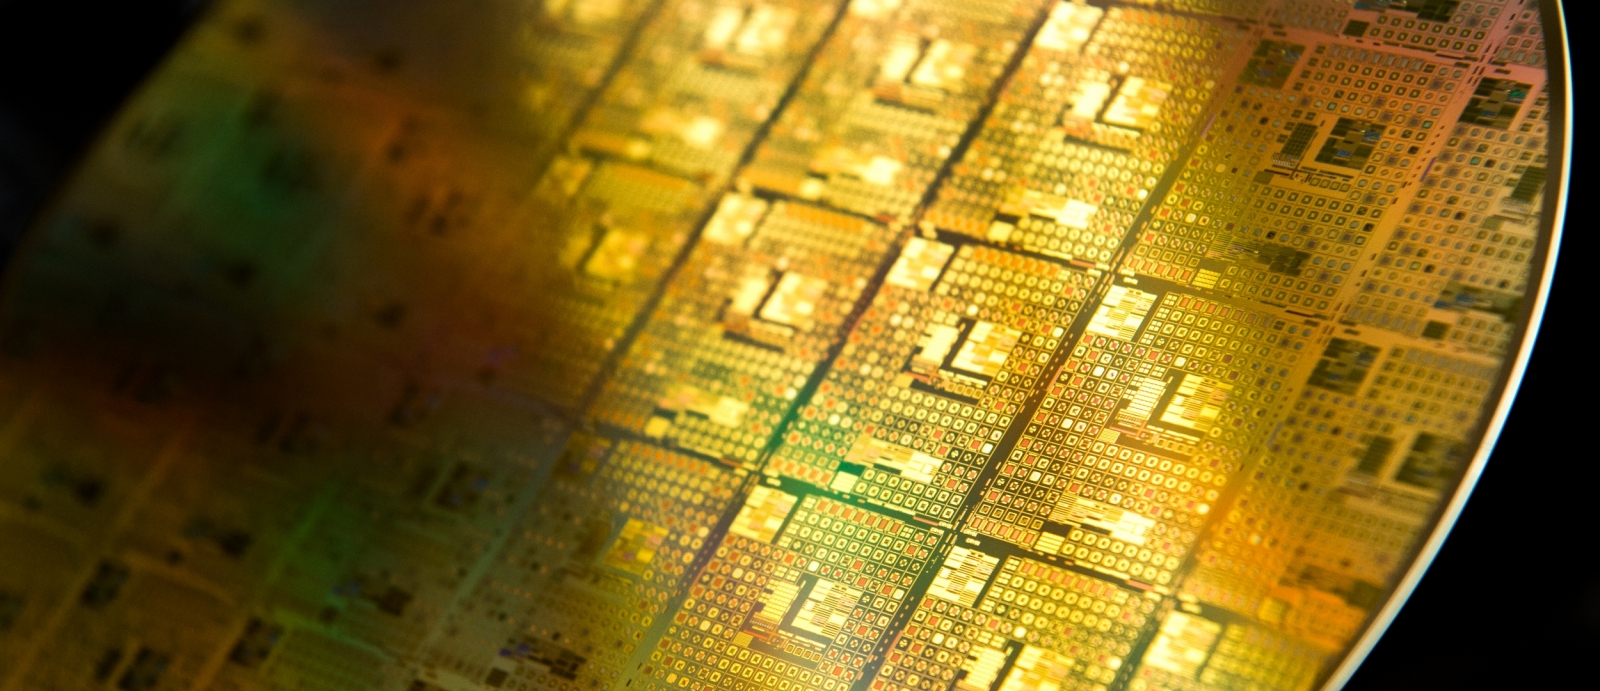 A photo of gold-colored integrated circuit wafer.